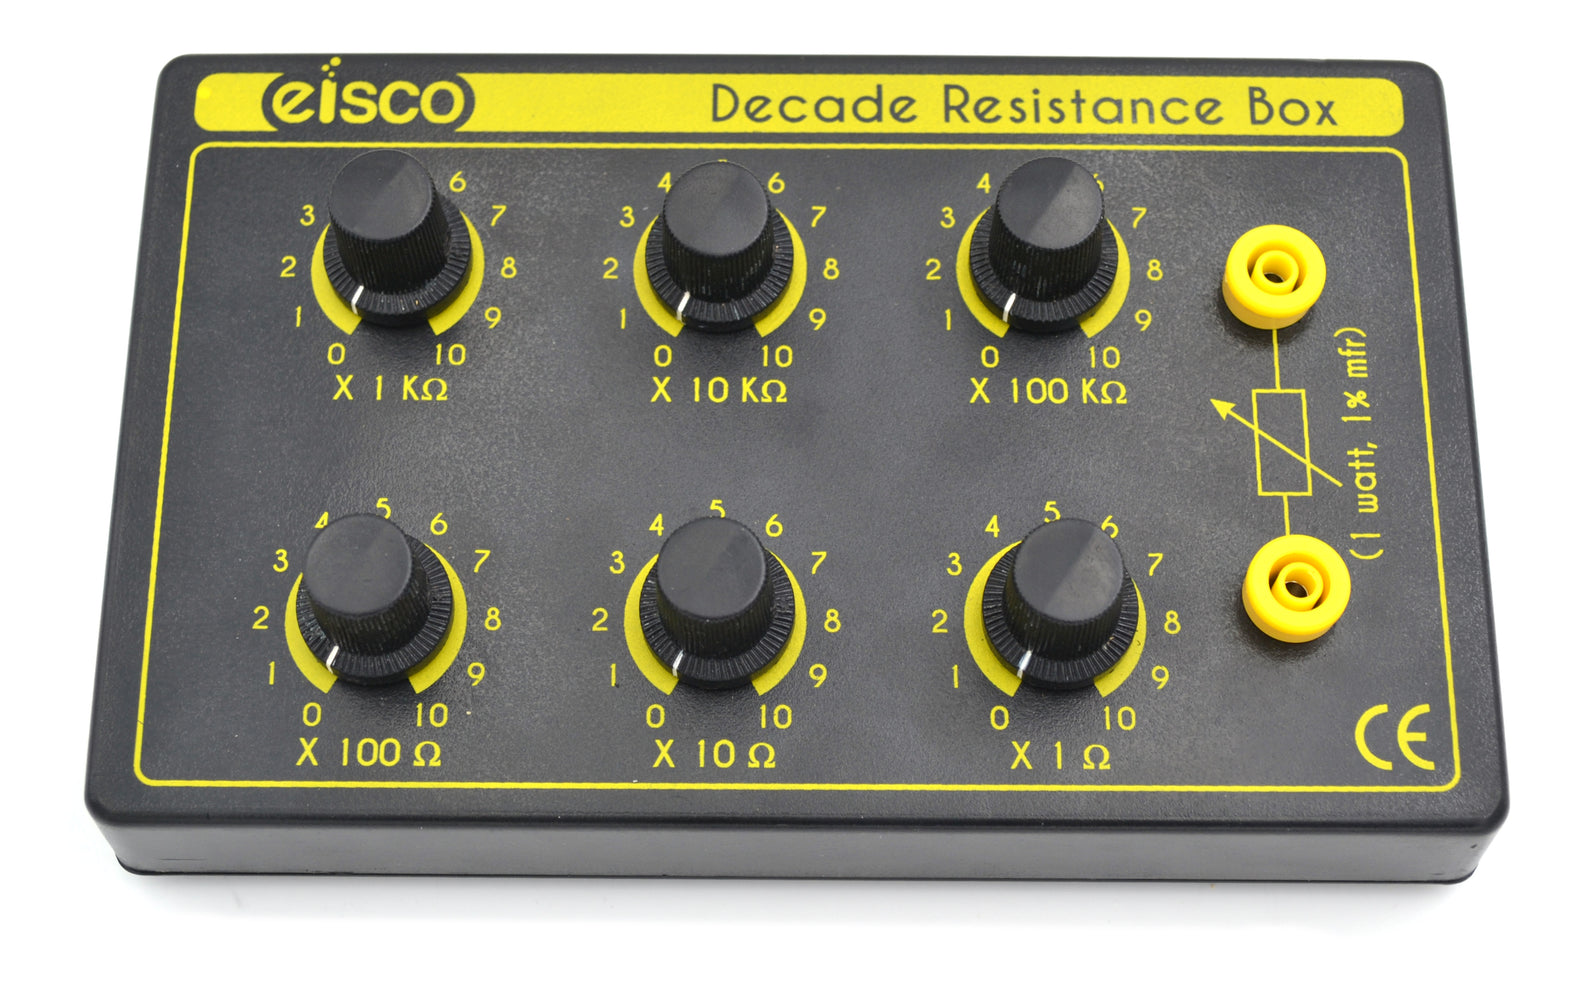 6-Decade Resistance Box, Variable from 0-1,111,110 Ohms